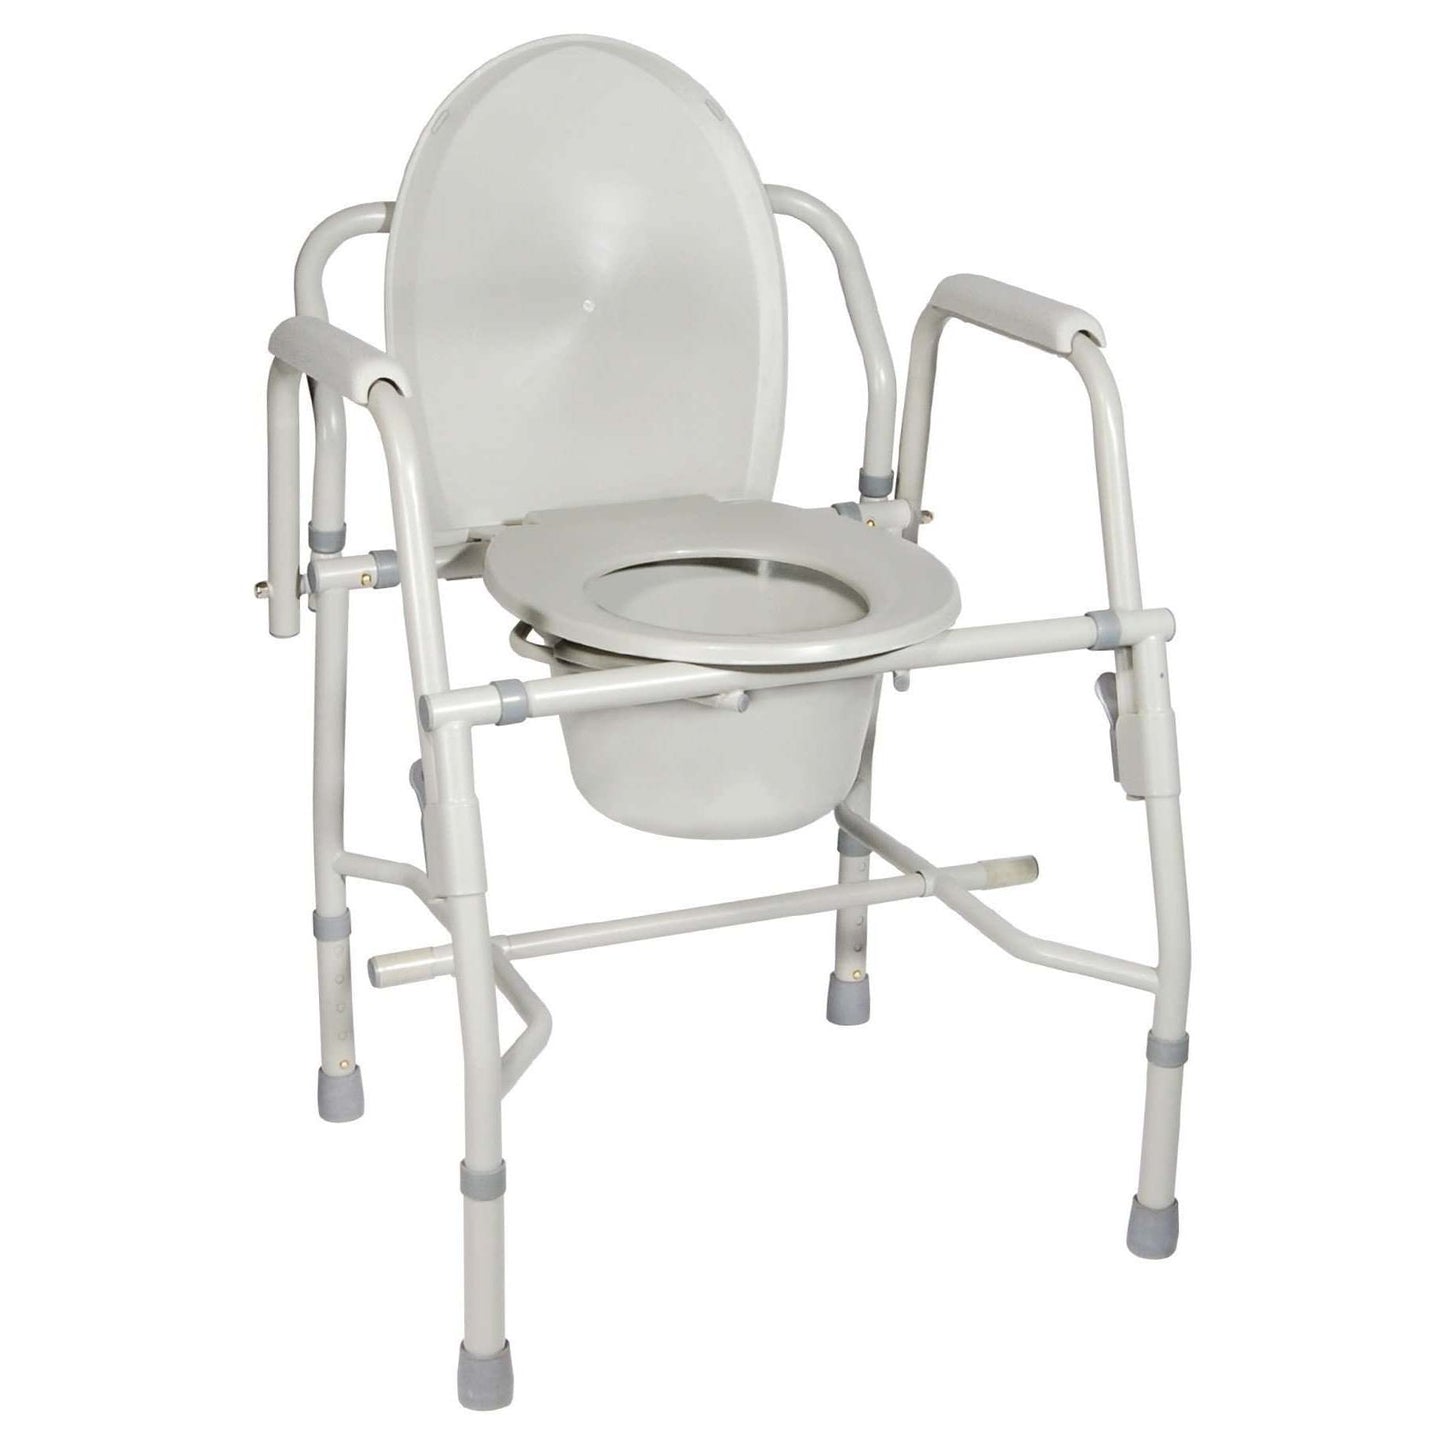 Drive Medical 11125KD-1 Deluxe Steel Drop-Arm Commode W/ Plastic Seat 300lb max